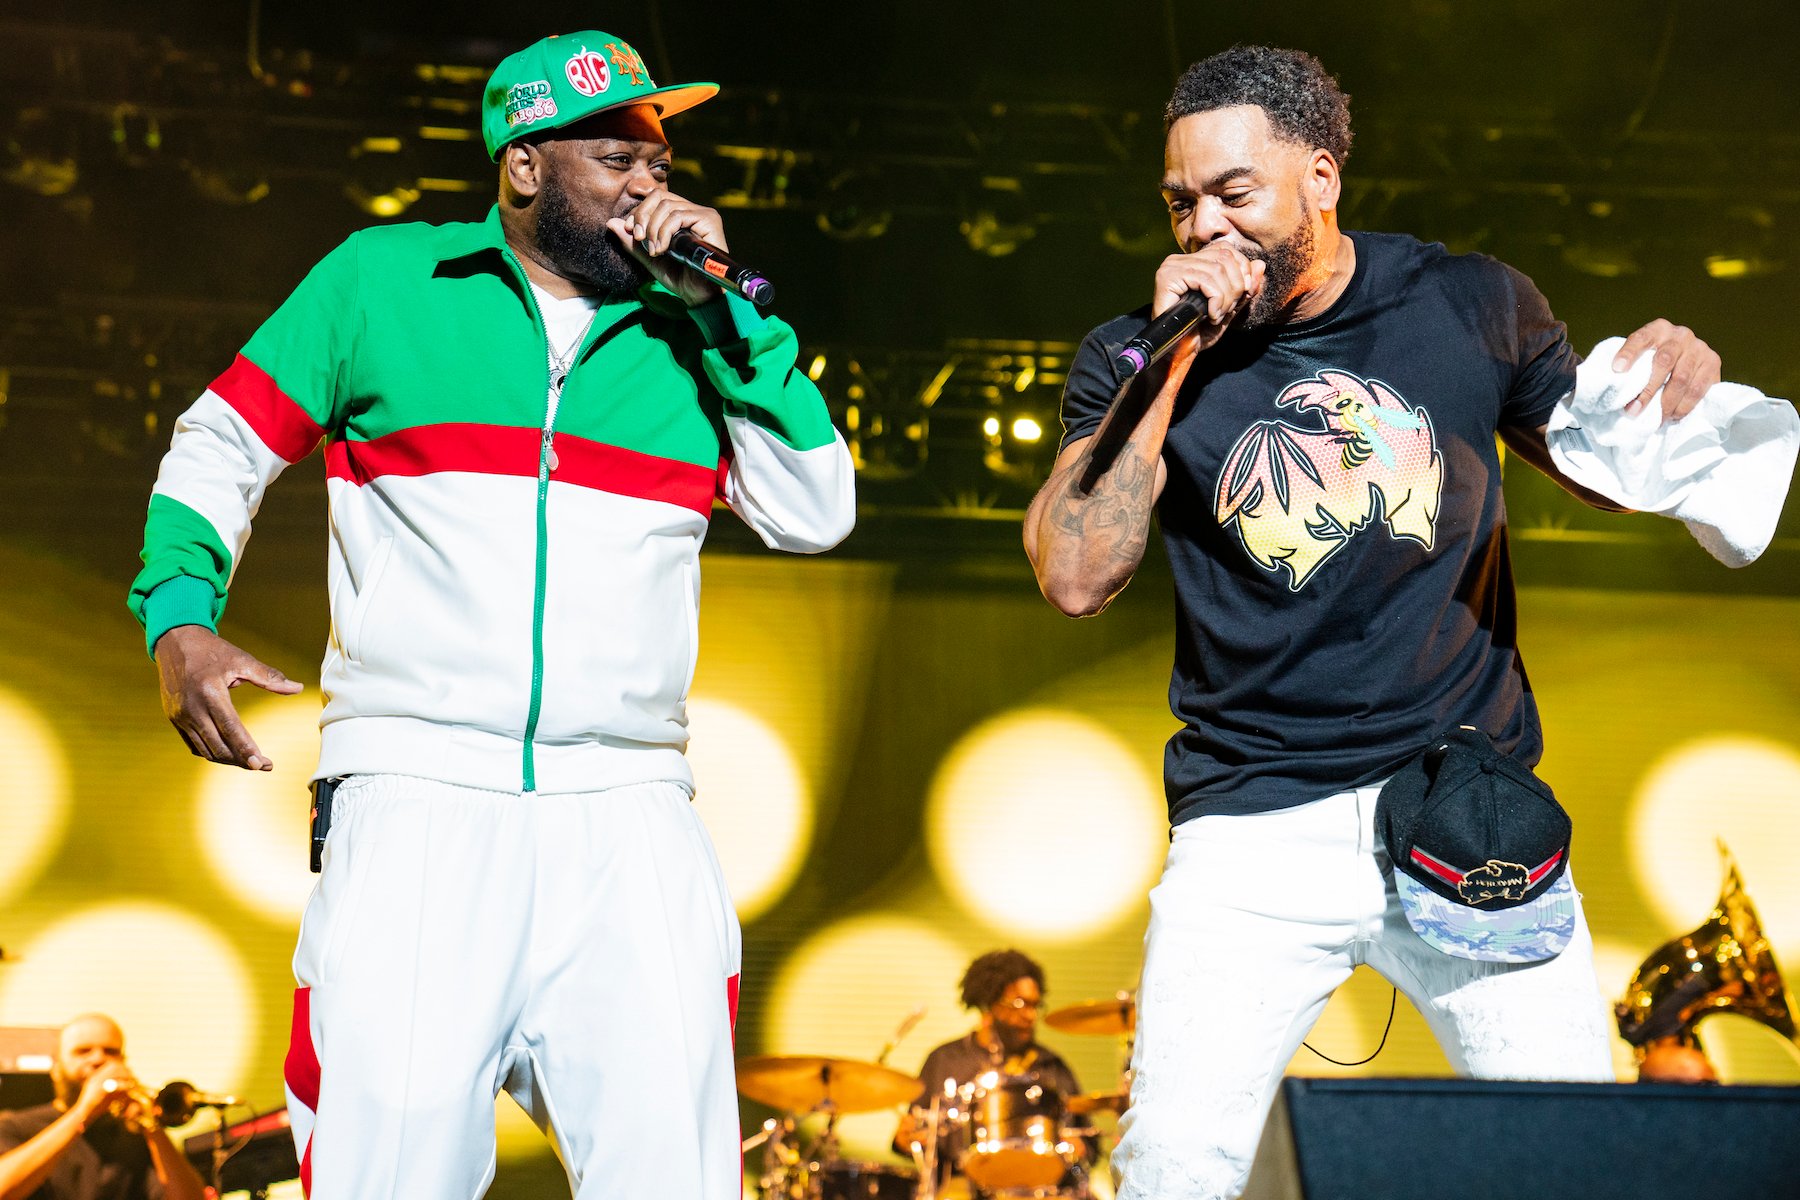 The Wu-Tang Clan will be performing a special tribute at the 2022 BET Hip Hop Awards. Here, Ghostface Killah and Method Man perform together.